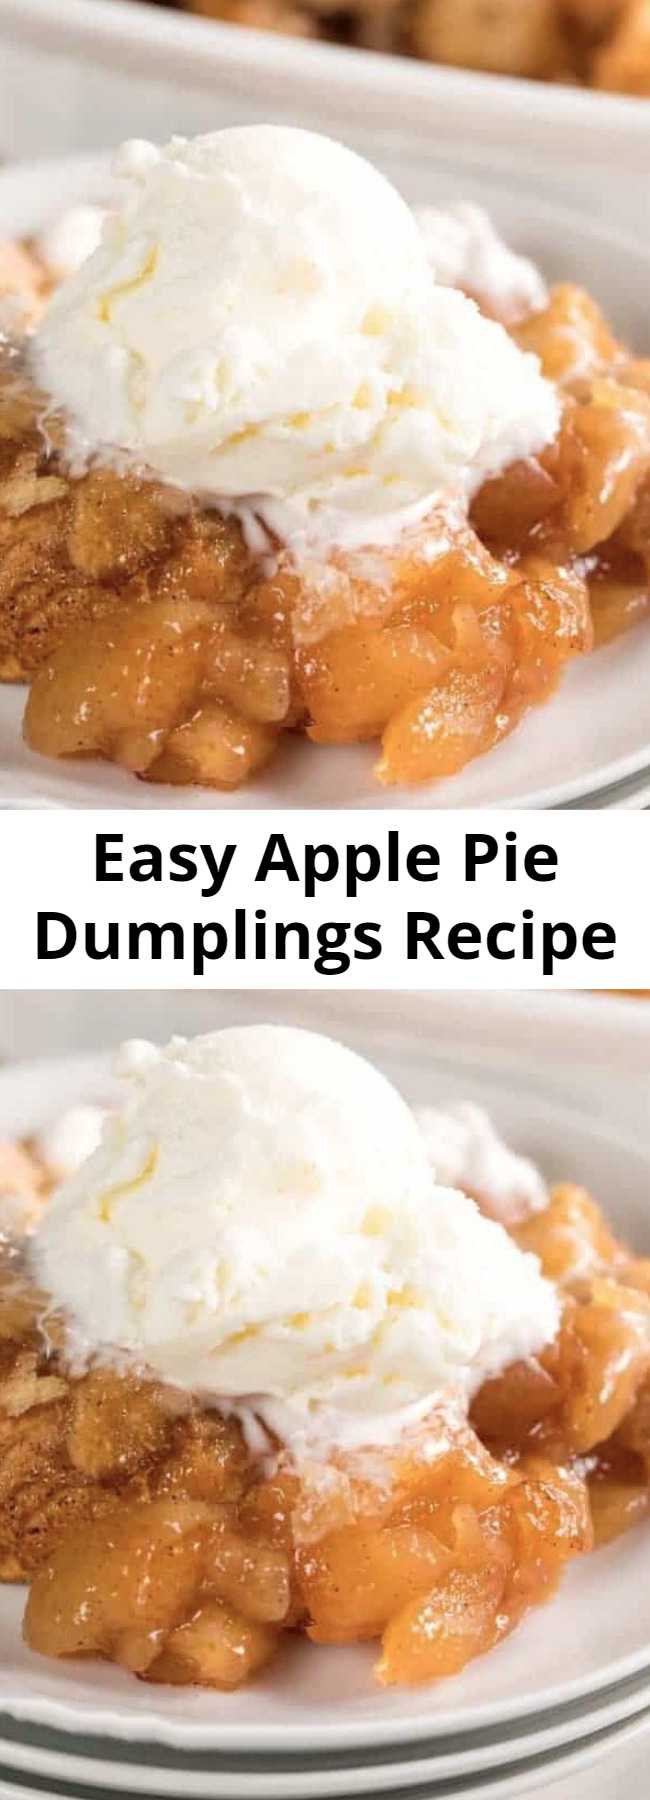 Easy Apple Pie Dumplings Recipe - Apple Pie Dumplings made with just two easy ingredients! Simply add them to a baking dish and cook until tender and lightly browned. Serve these dumplings warm out of the oven with a big scoop of vanilla ice cream or a drizzle of heavy cream.